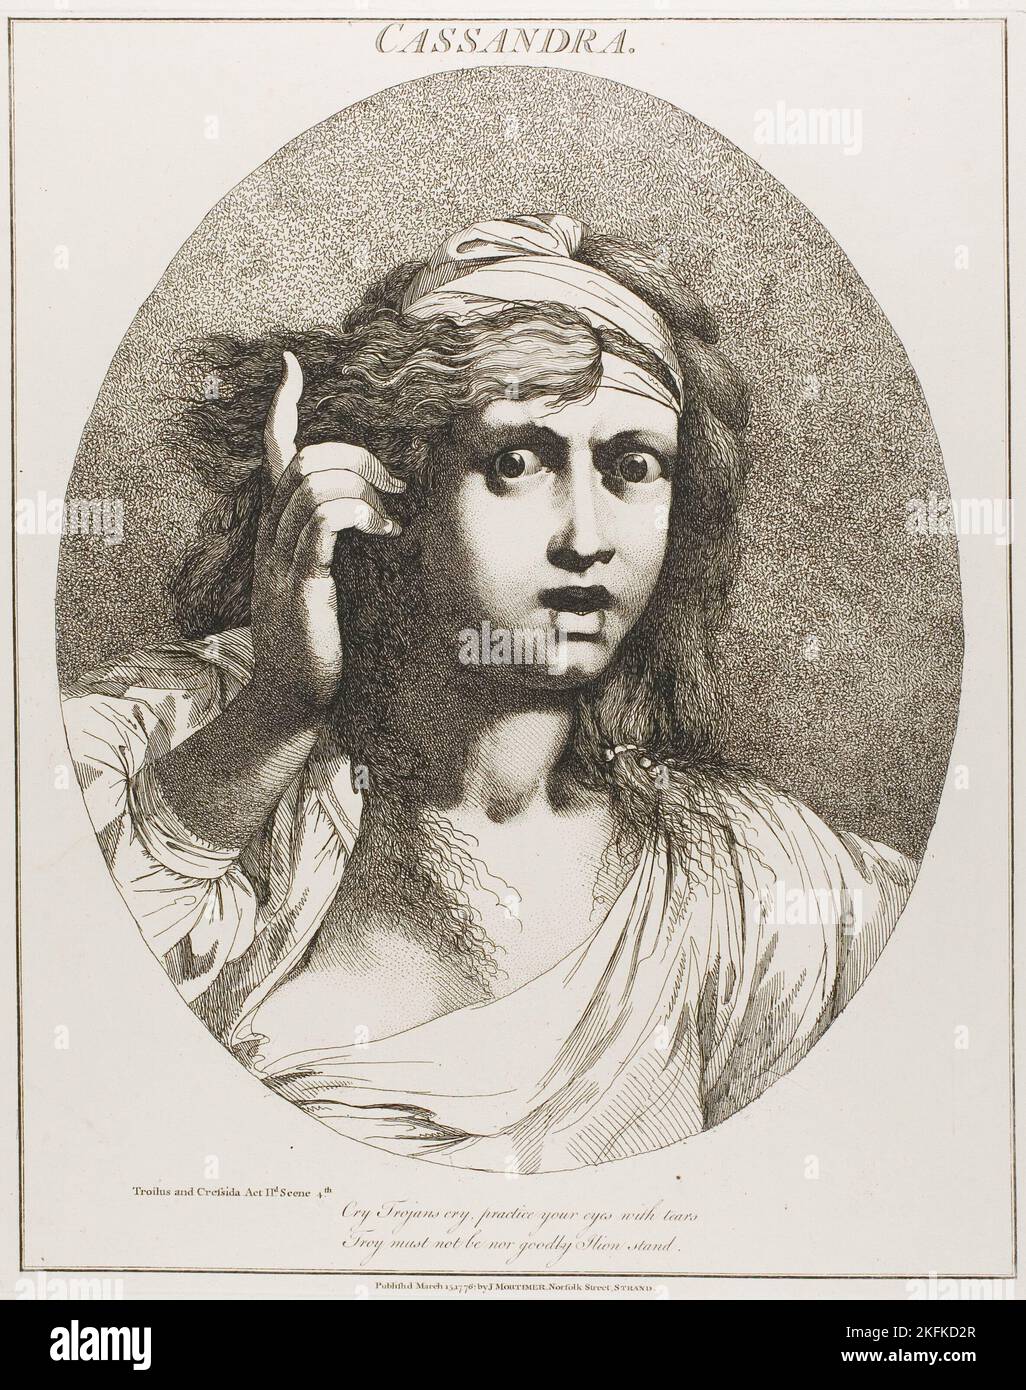 Cassandra, from Twelve Characters from Shakespeare, originally published March 15, 1776, published 1809. 'Cry Trojans cry, practice your eyes with tears, Troy must not be, nor goodly Ilion stand'. (Troilus and Cressida, Act II, Scene 4). Stock Photo